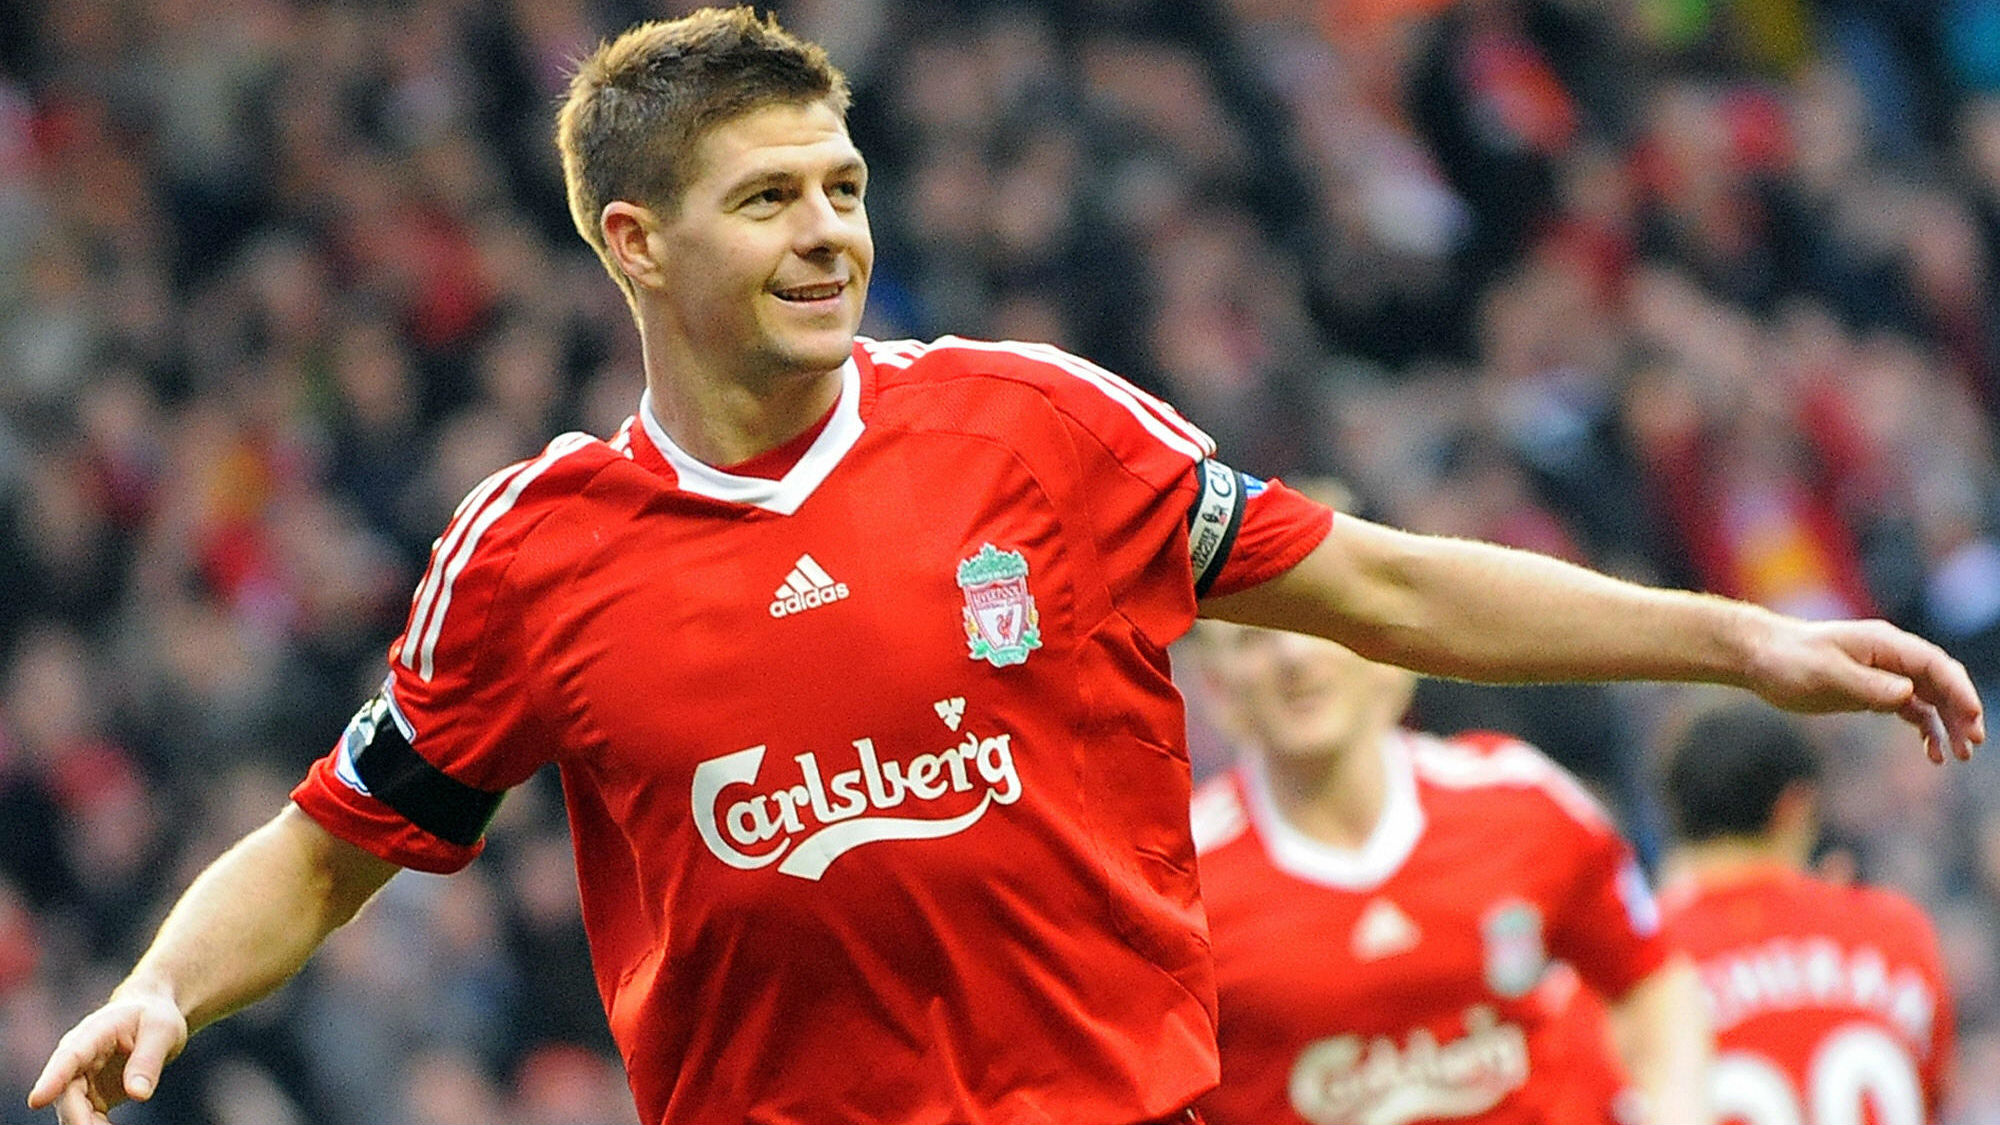 Gerrard to rejoin Liverpool - will he be the next Guardiola? - The Week UK